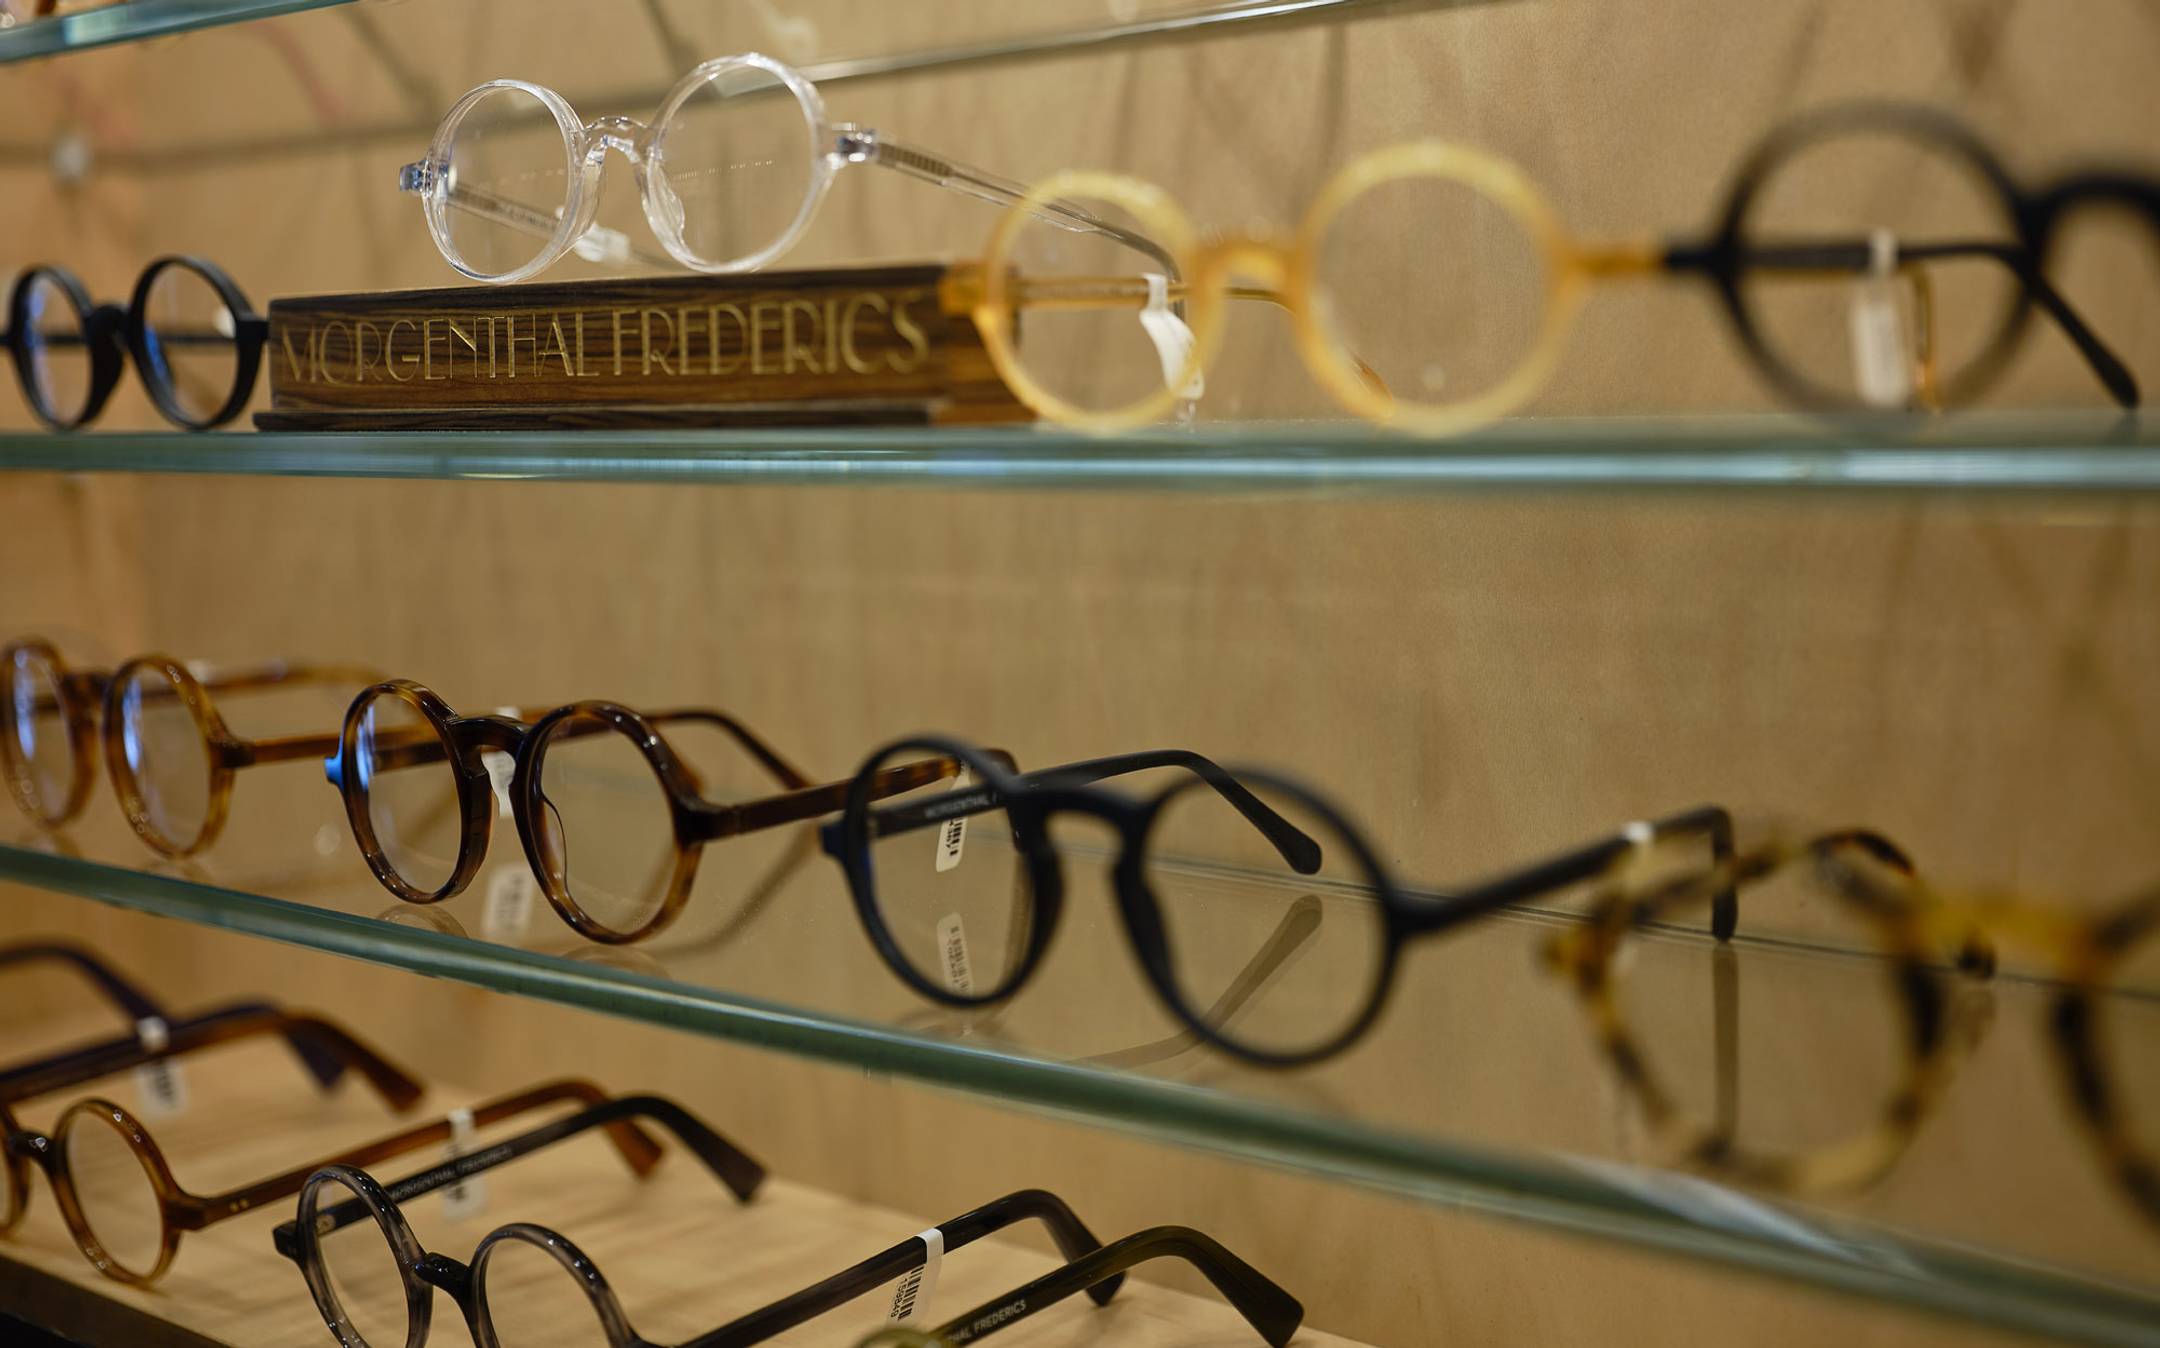 Close up of multiple pairs of Morgenthal Frederics eyeglasses on a shelf